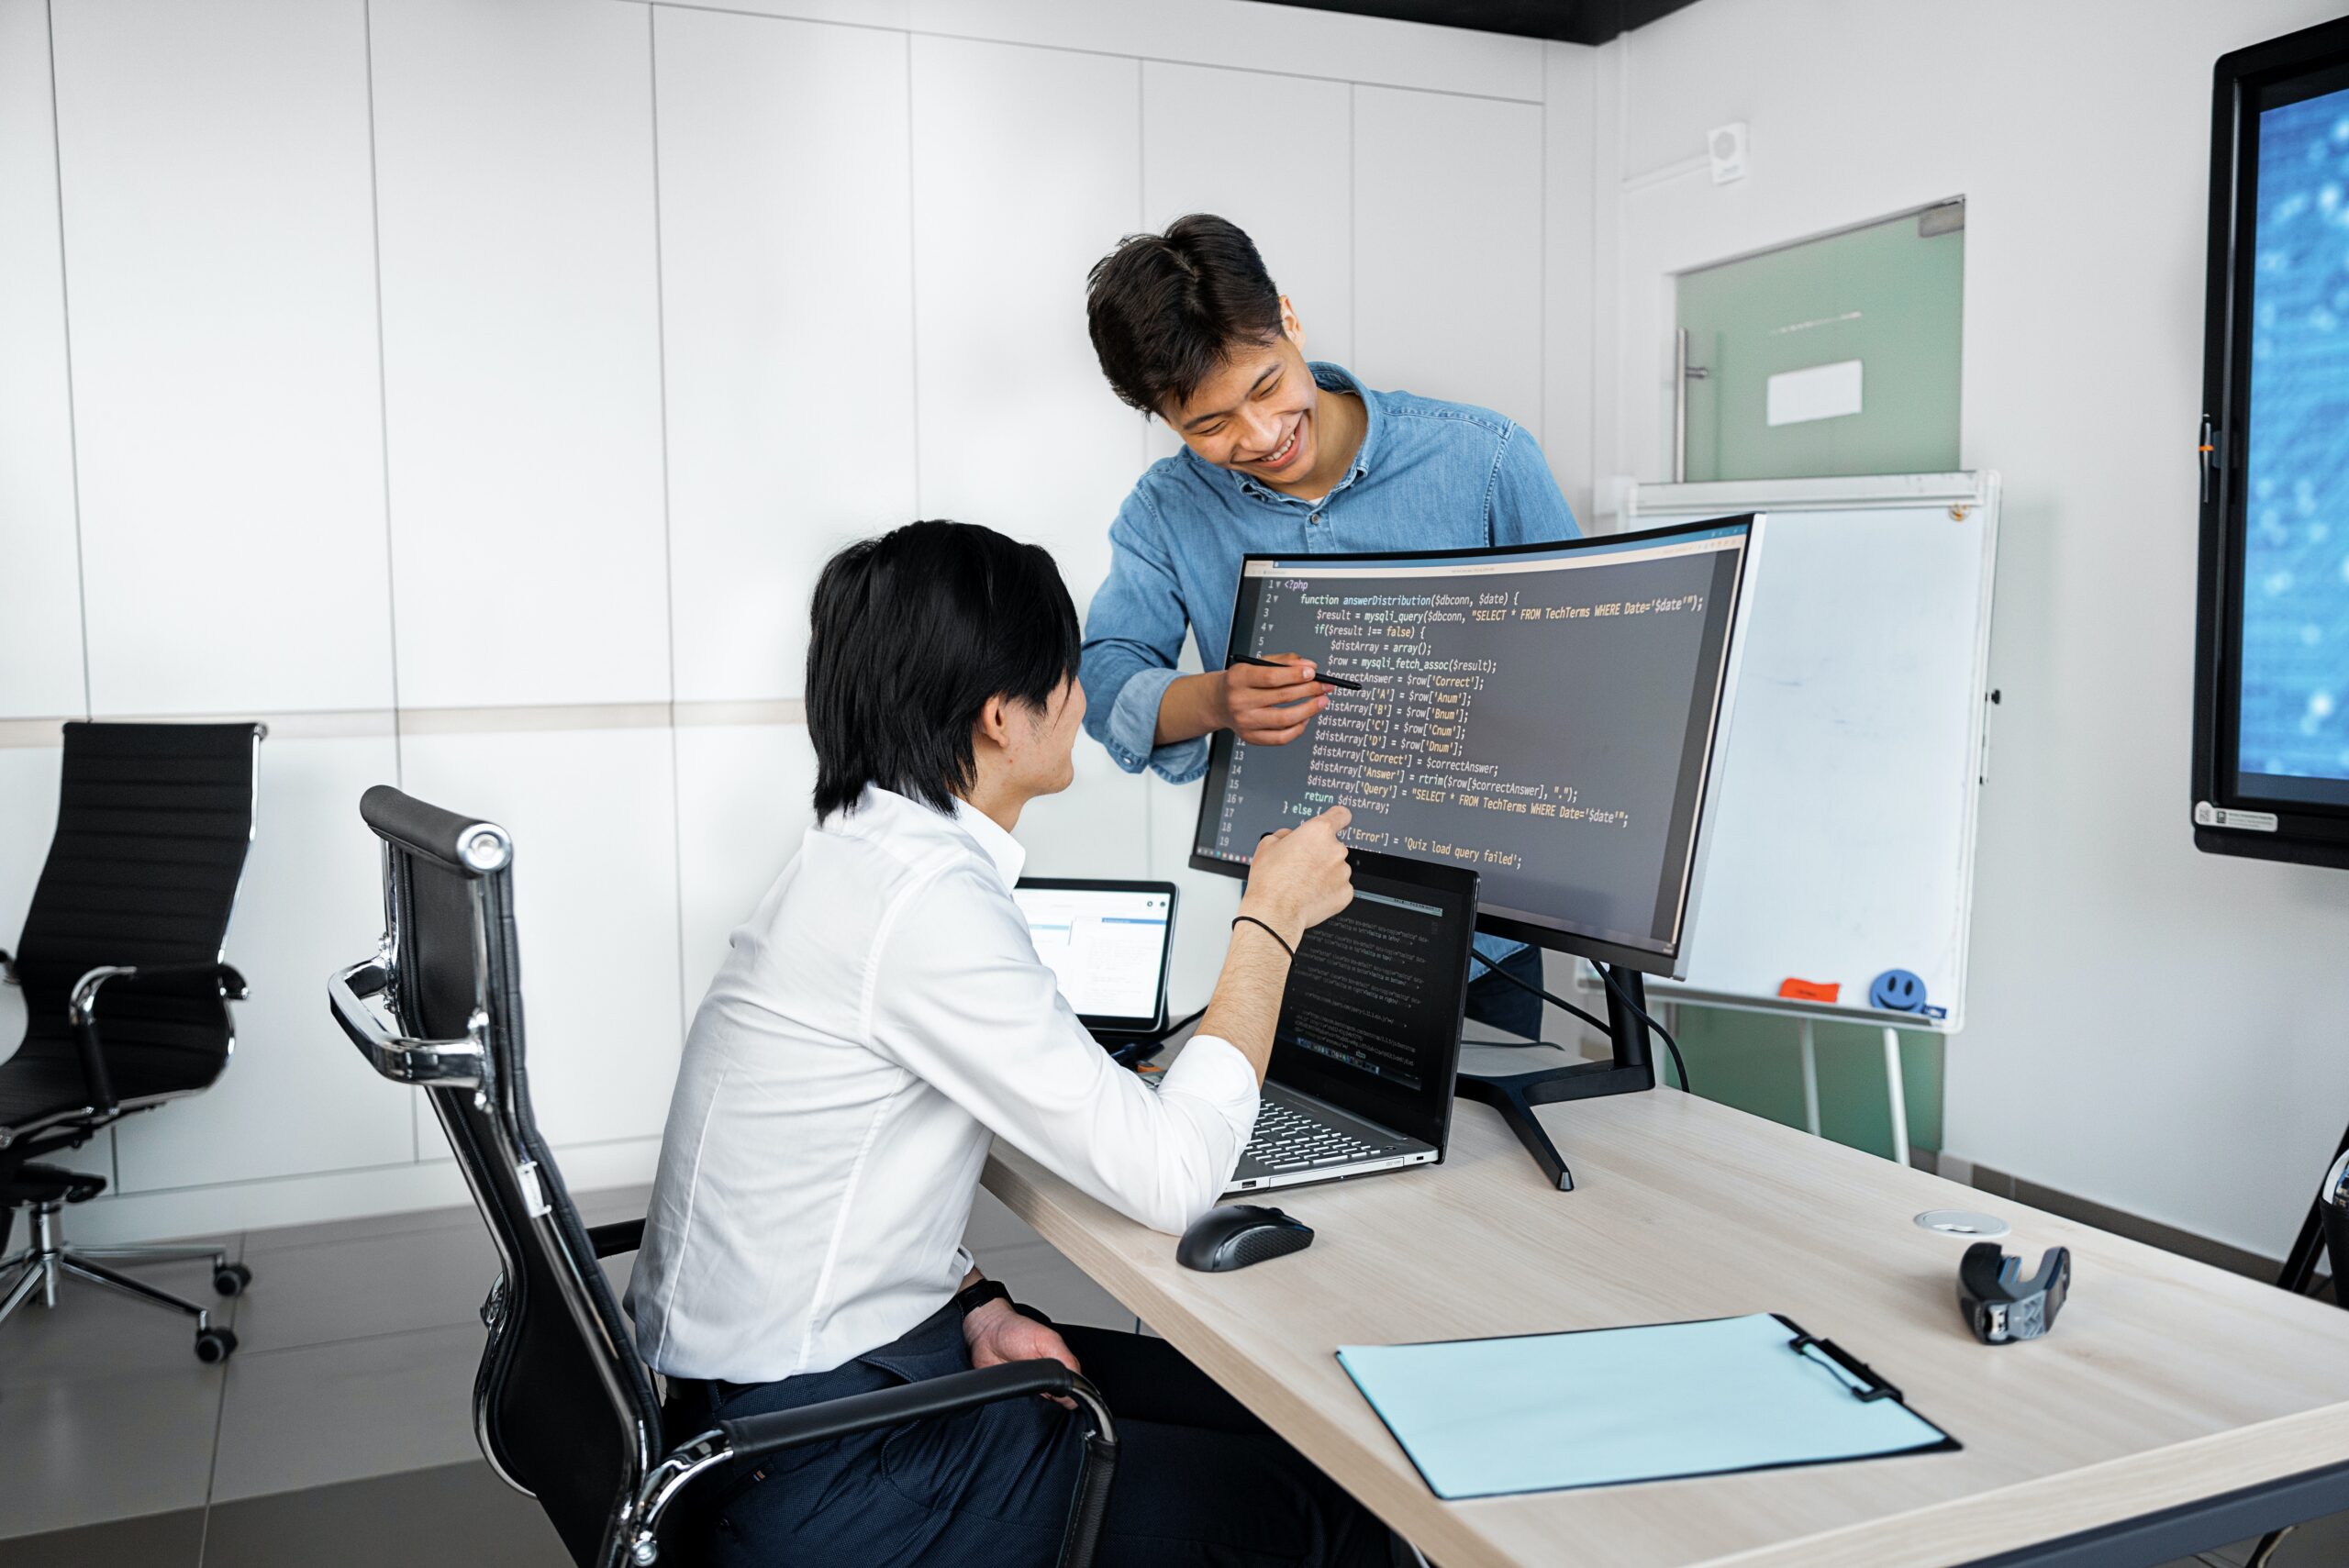 A software developer is discussing code with a colleague while writing code on a PC in suspenx office.